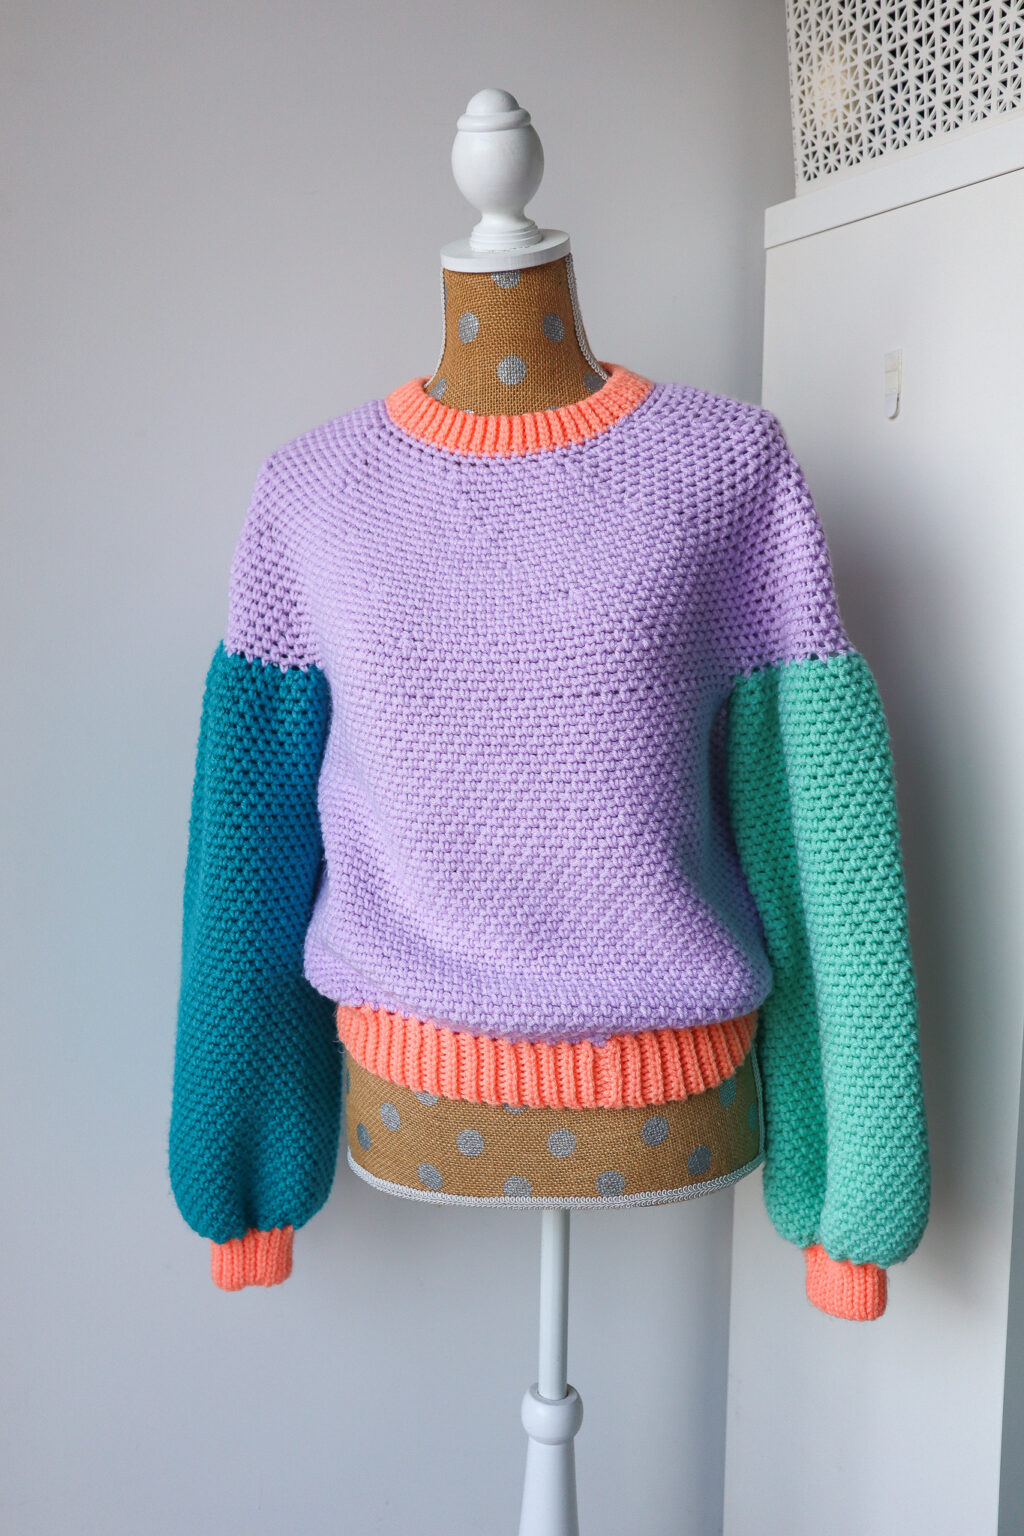 The Better Sweater – Worsted Crochet Sweater Pattern – The Snugglery